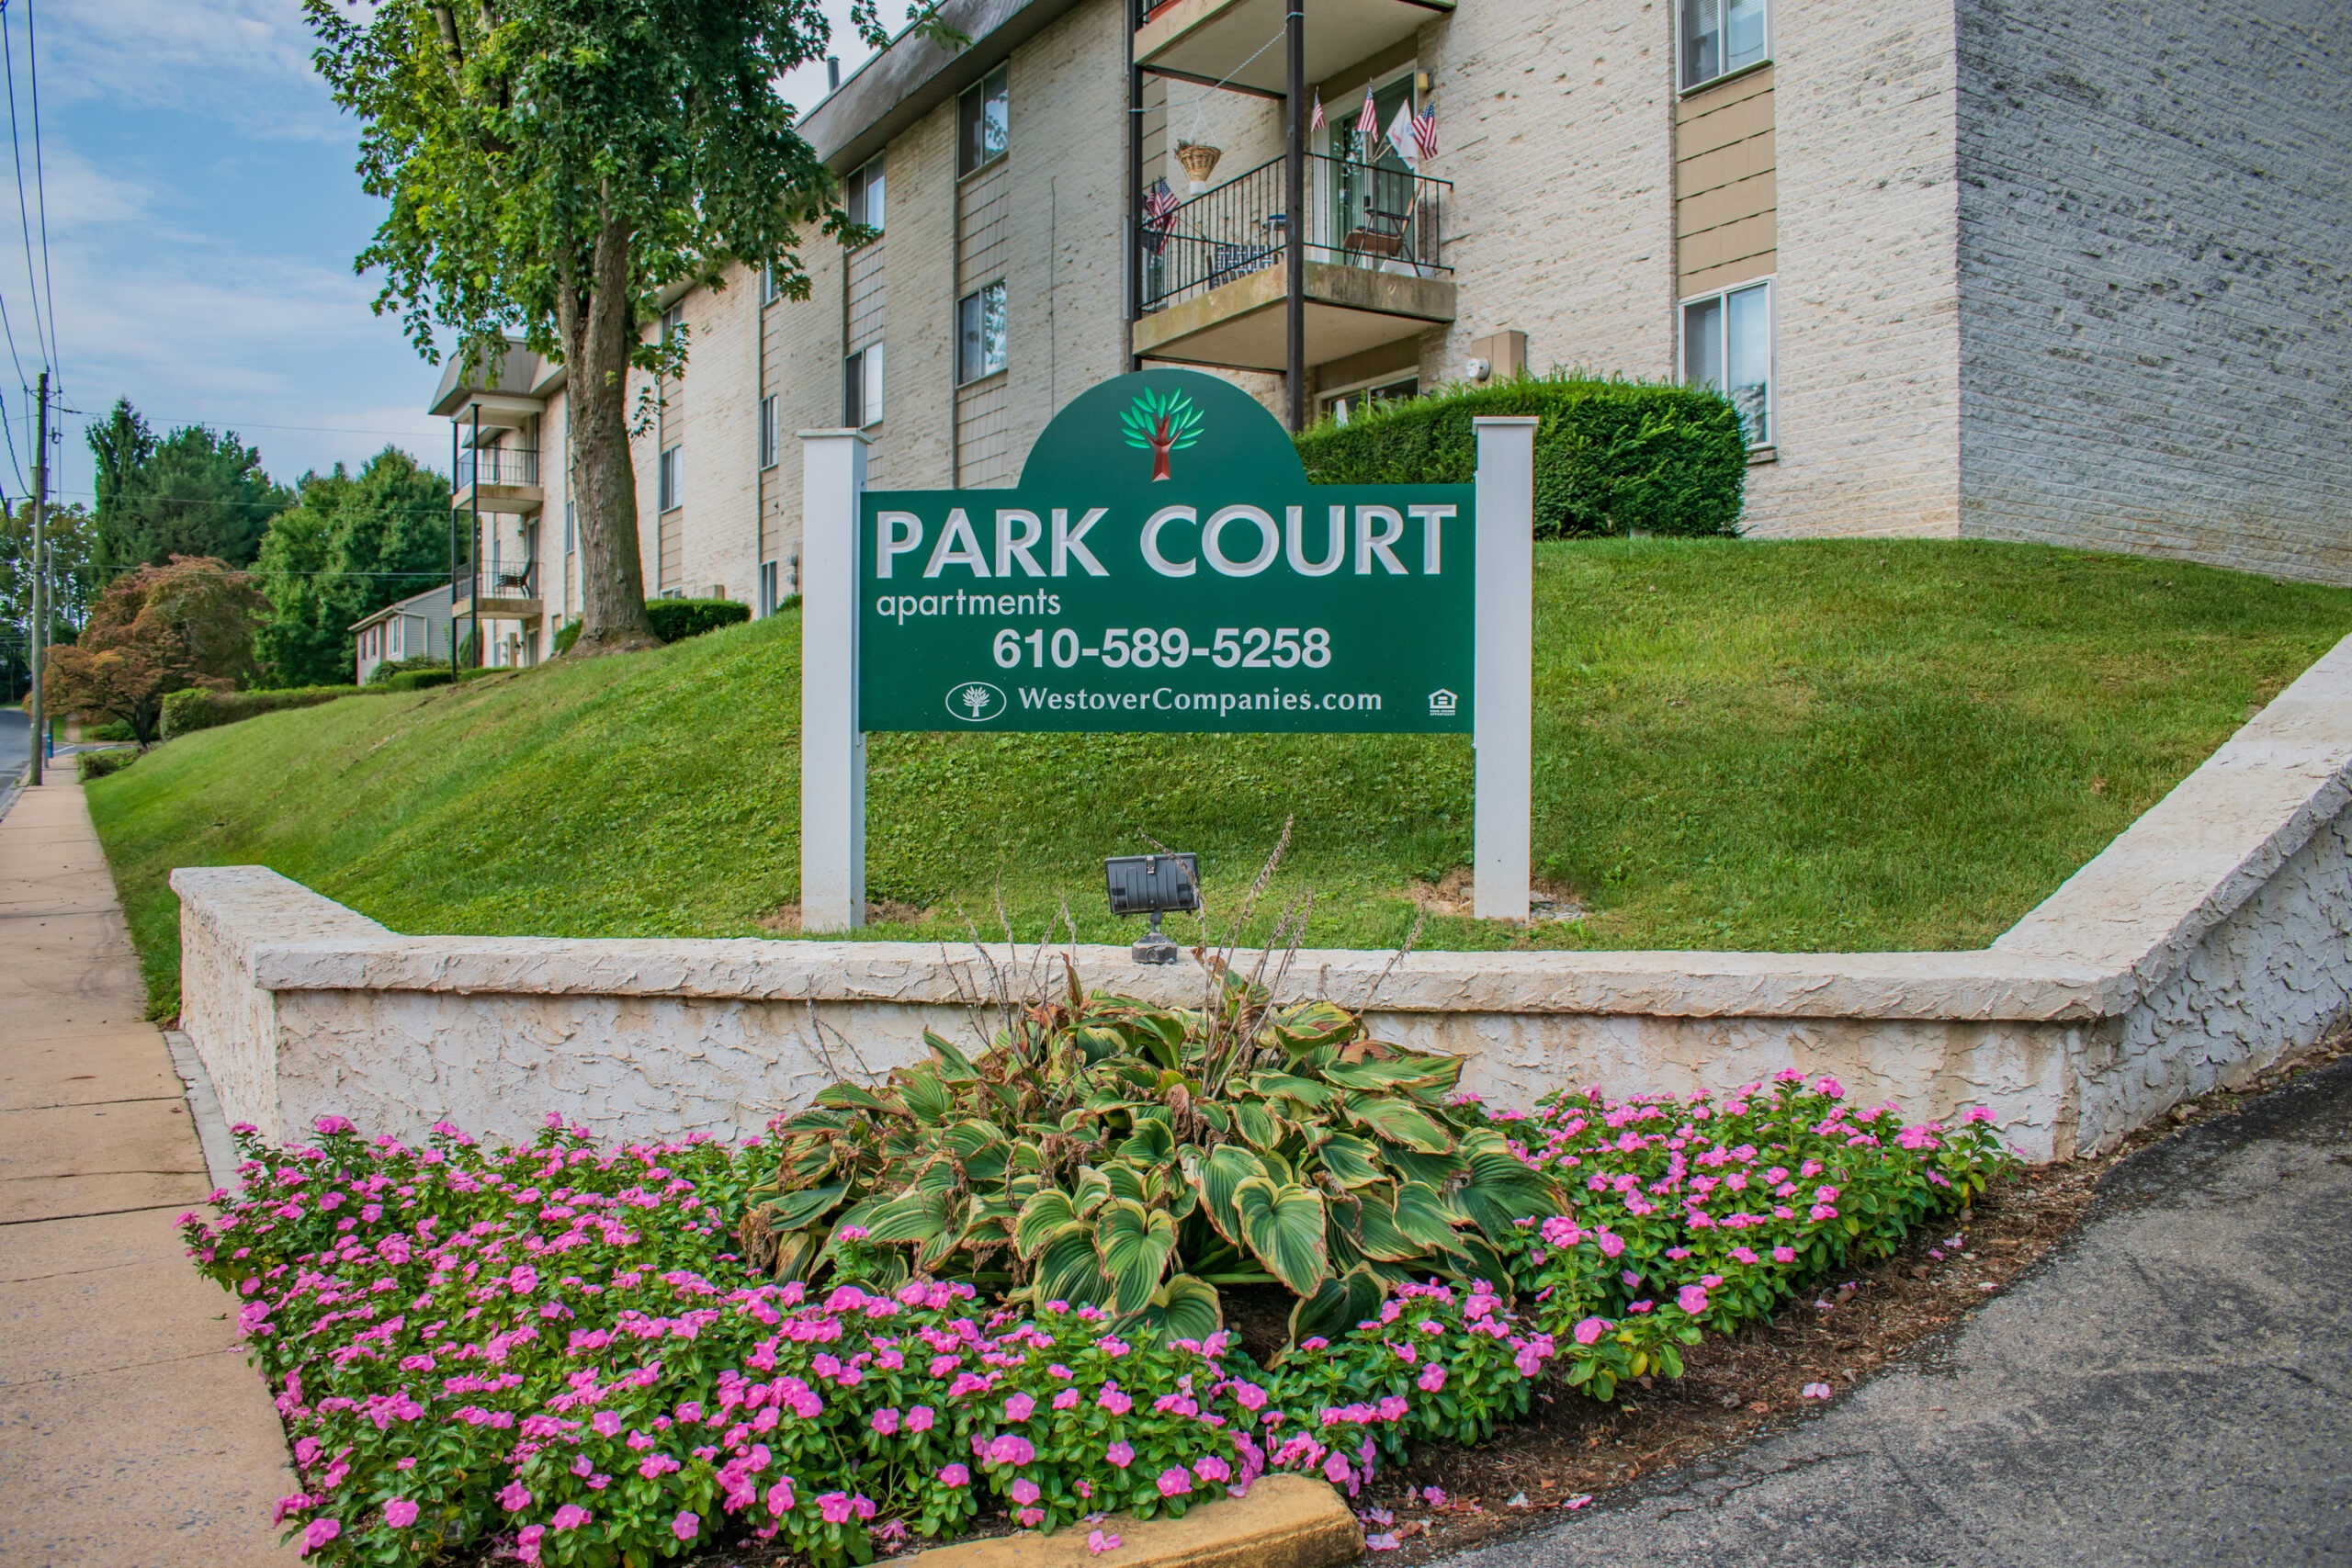 Park Court Apartments signage in front of the property